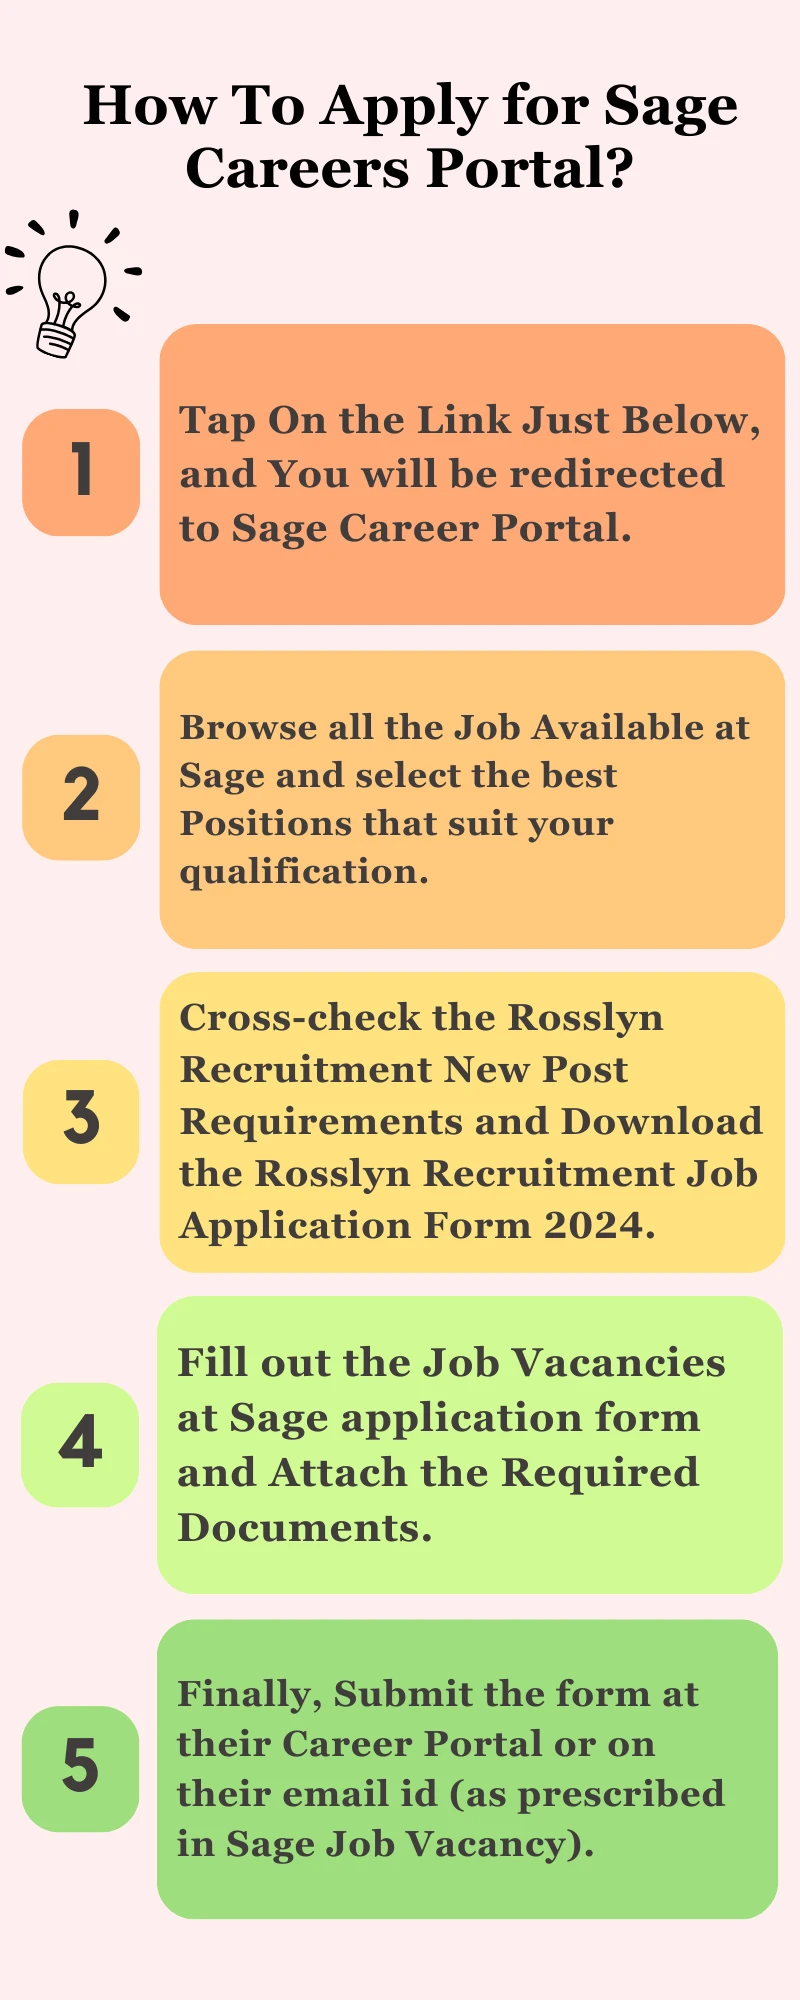 How To Apply for Sage Careers Portal?